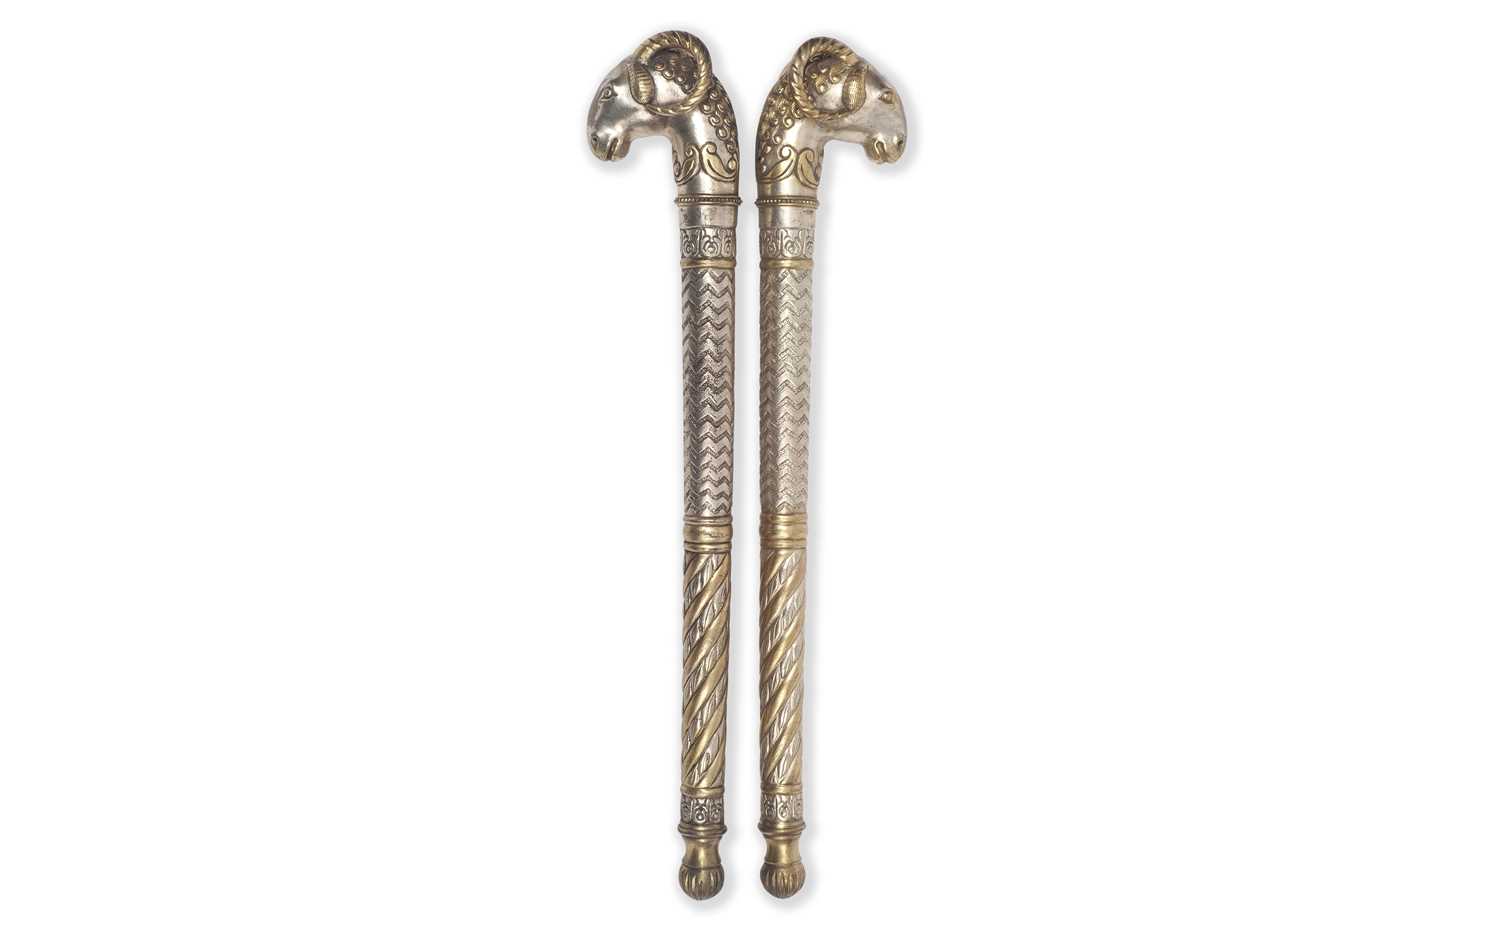 A PAIR OF EARLY 20TH CENTURY INDIAN CEREMONIAL MACES, DECCAN OR NORTHERN INDIA